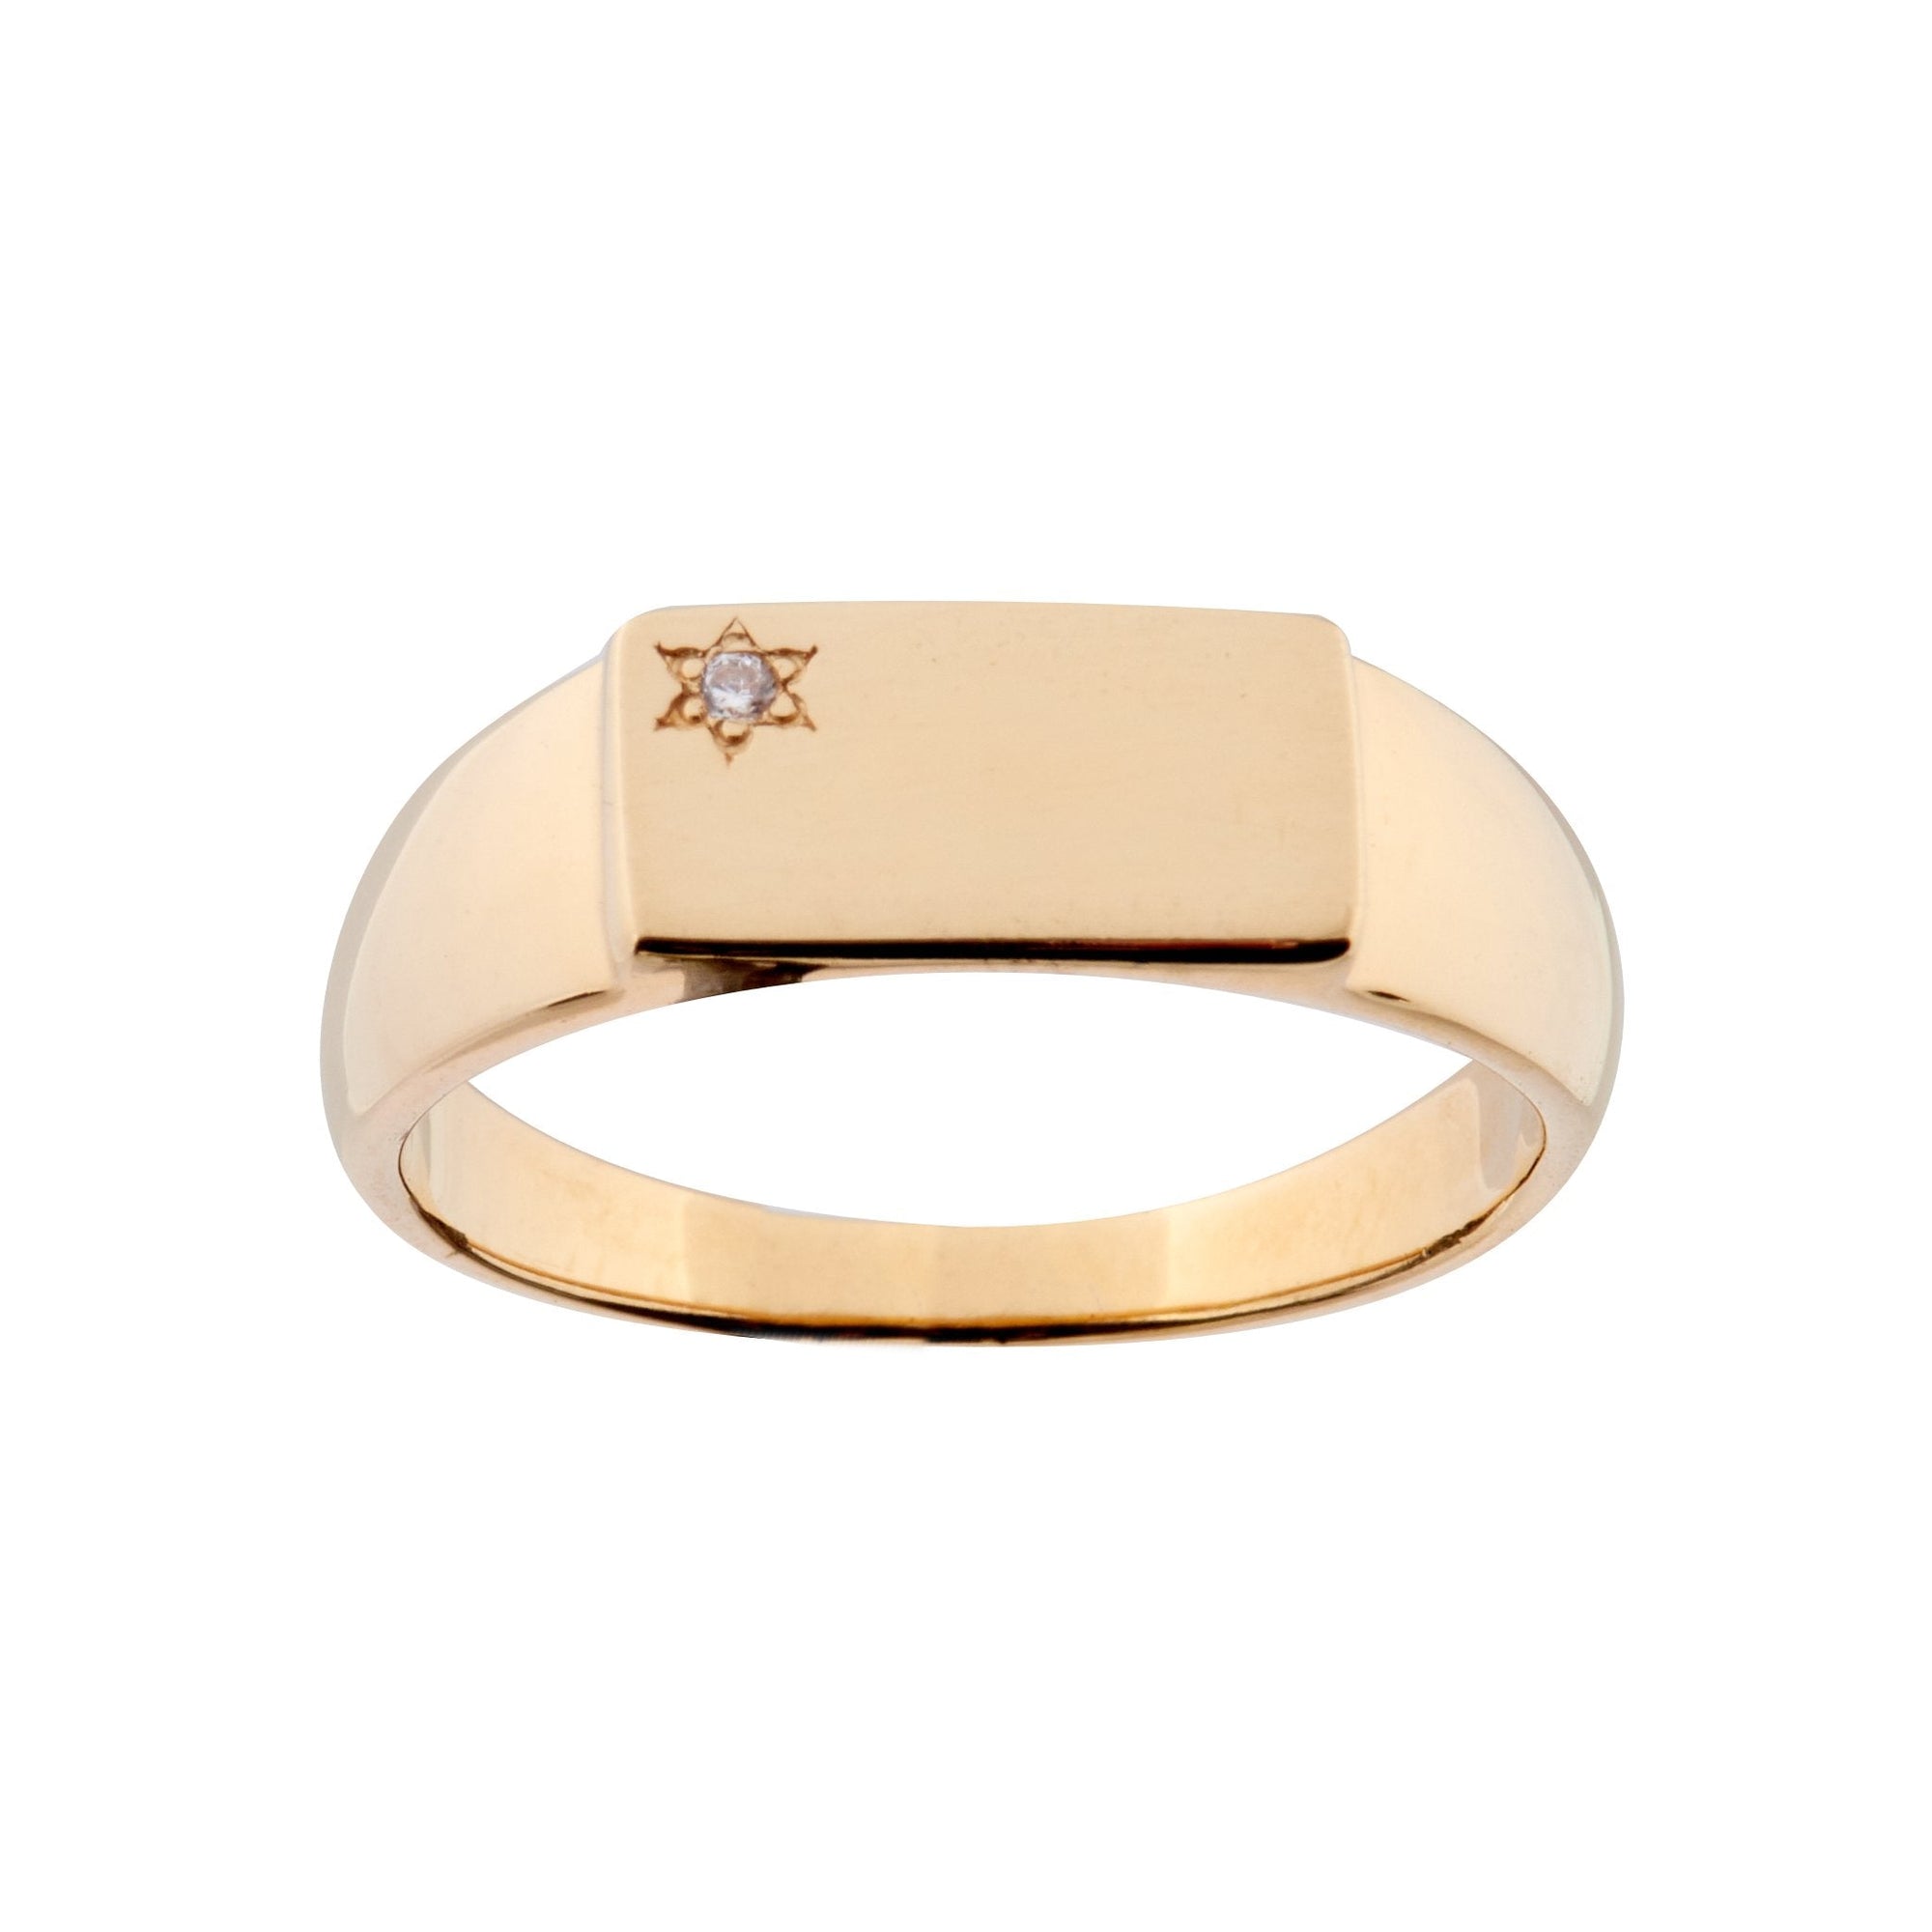 Duo Jewellery Rings Yellow Gold / 5 Duo Rectangle Star Signet Pinky Ring